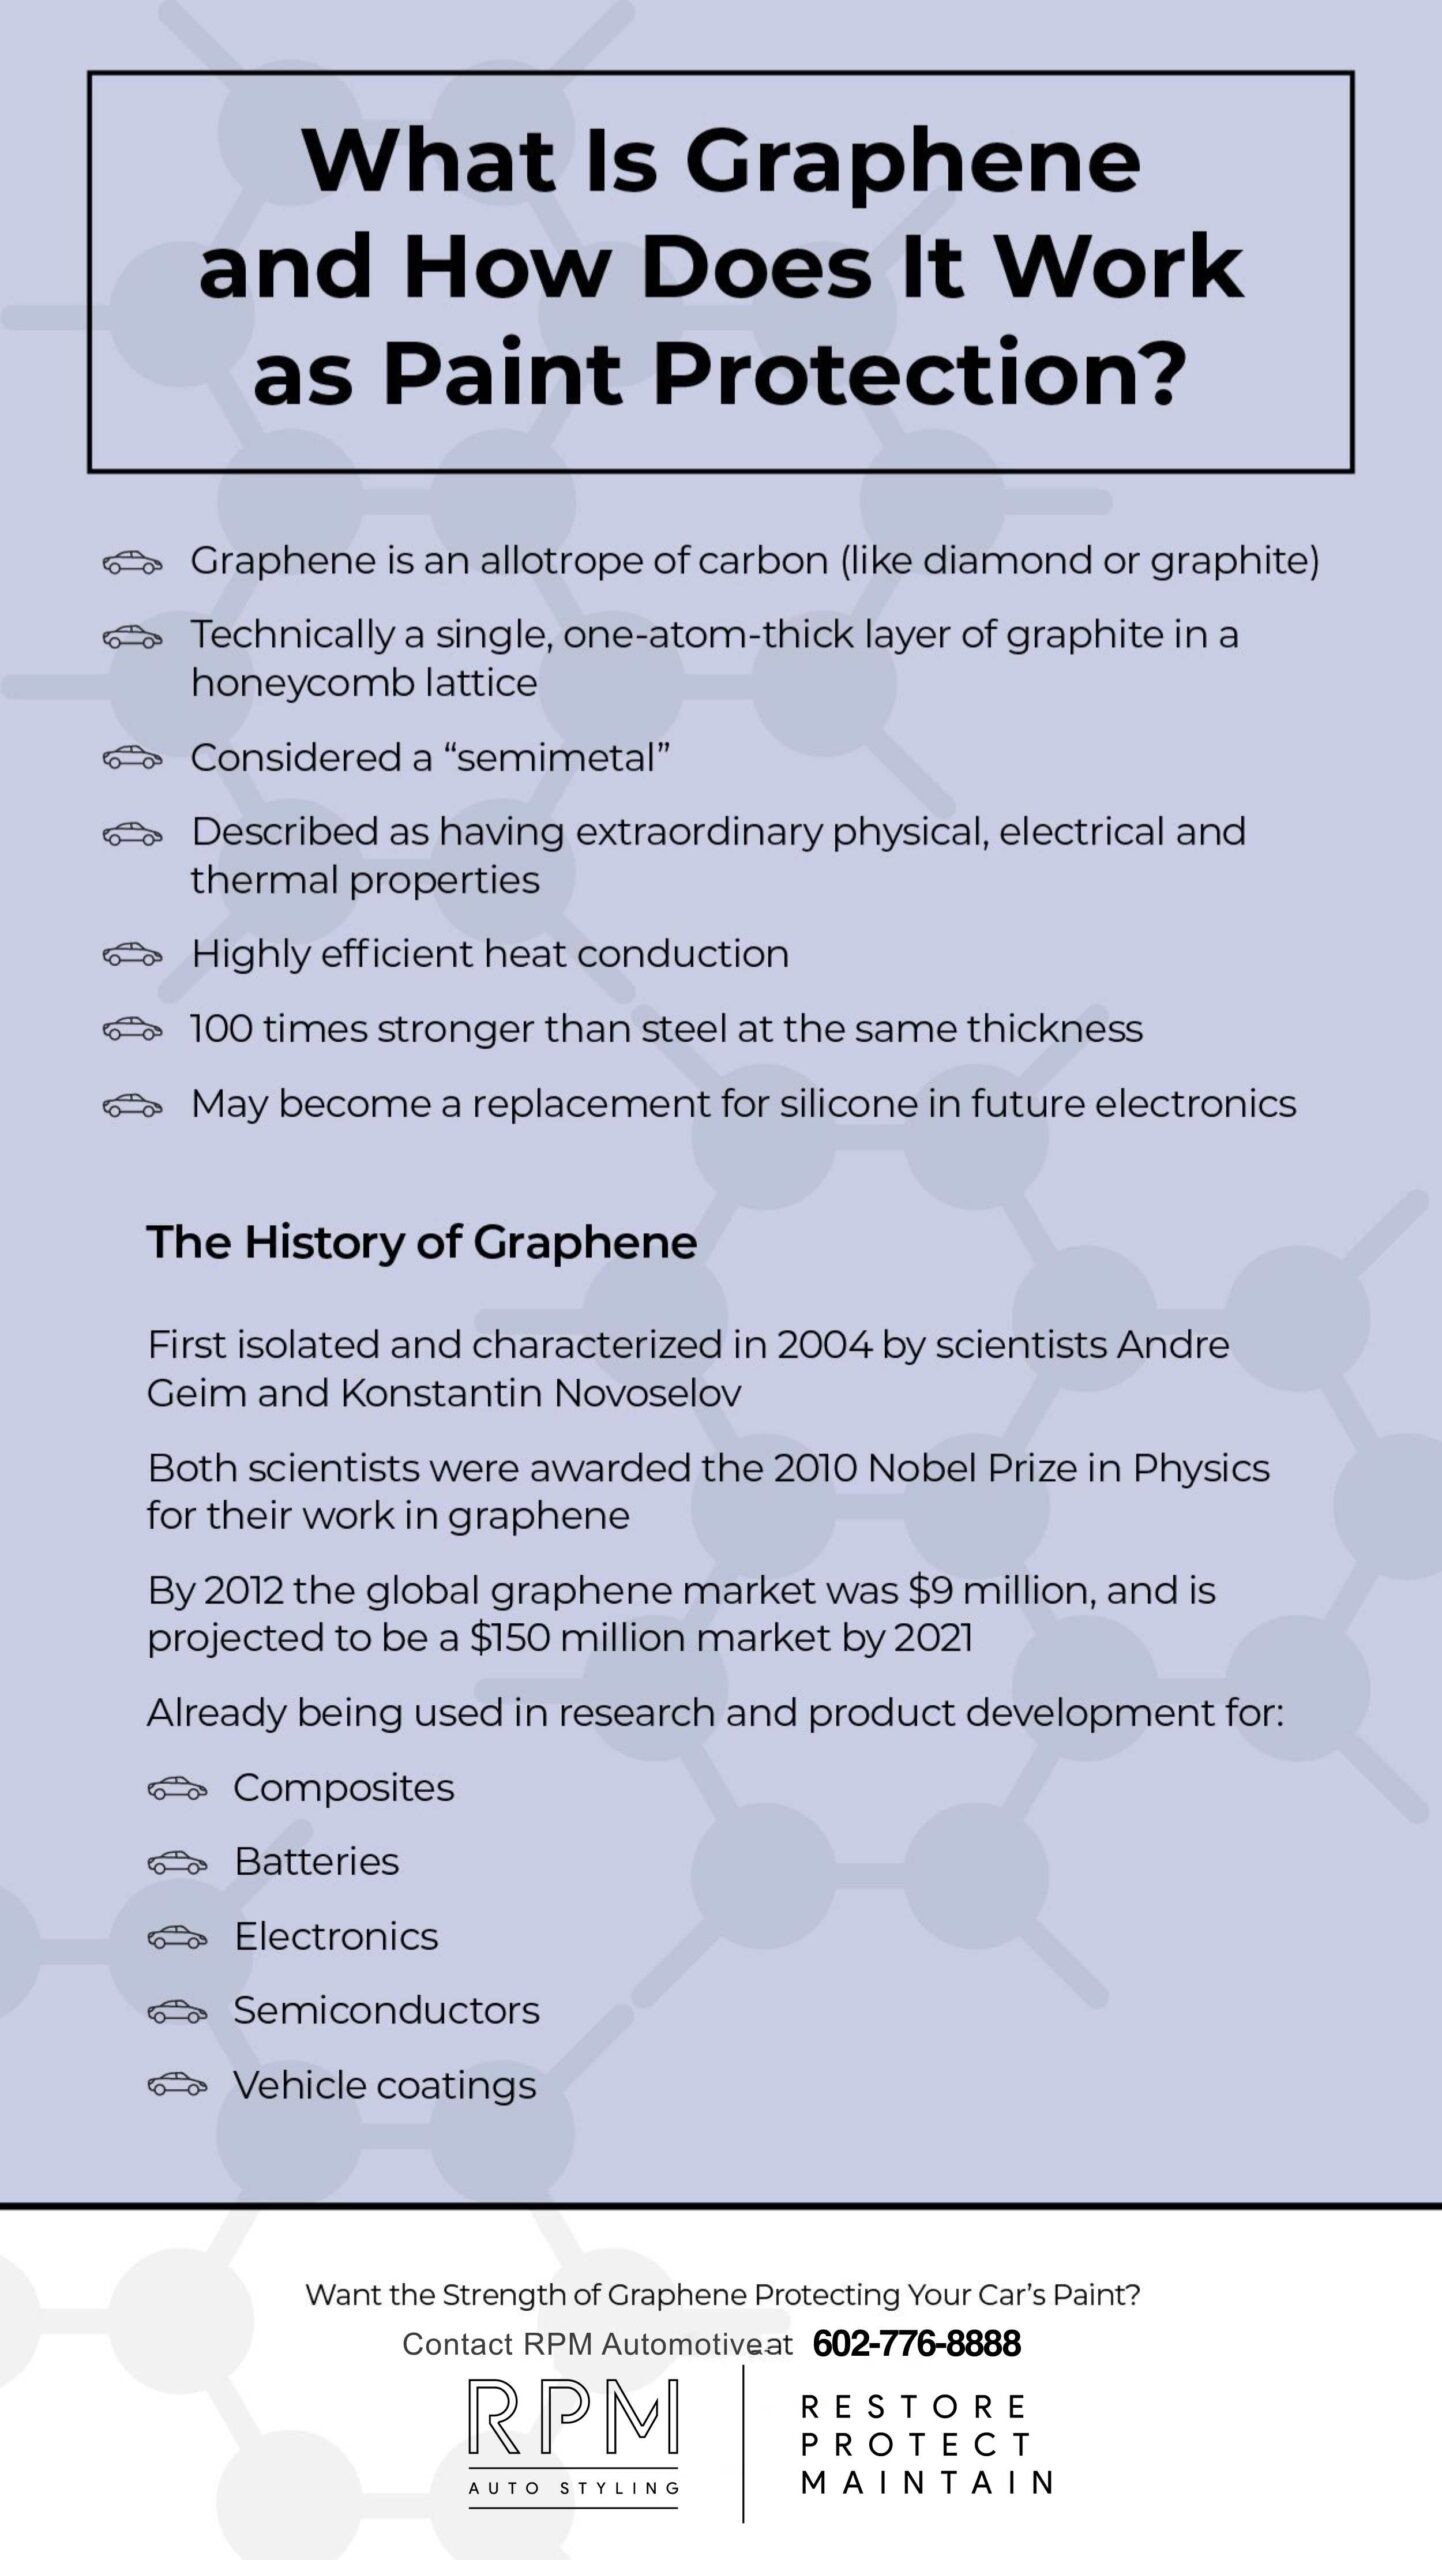 What-is-Graphene-and-How-Does-it-Protect-Car-Paint-RPM-Automotive